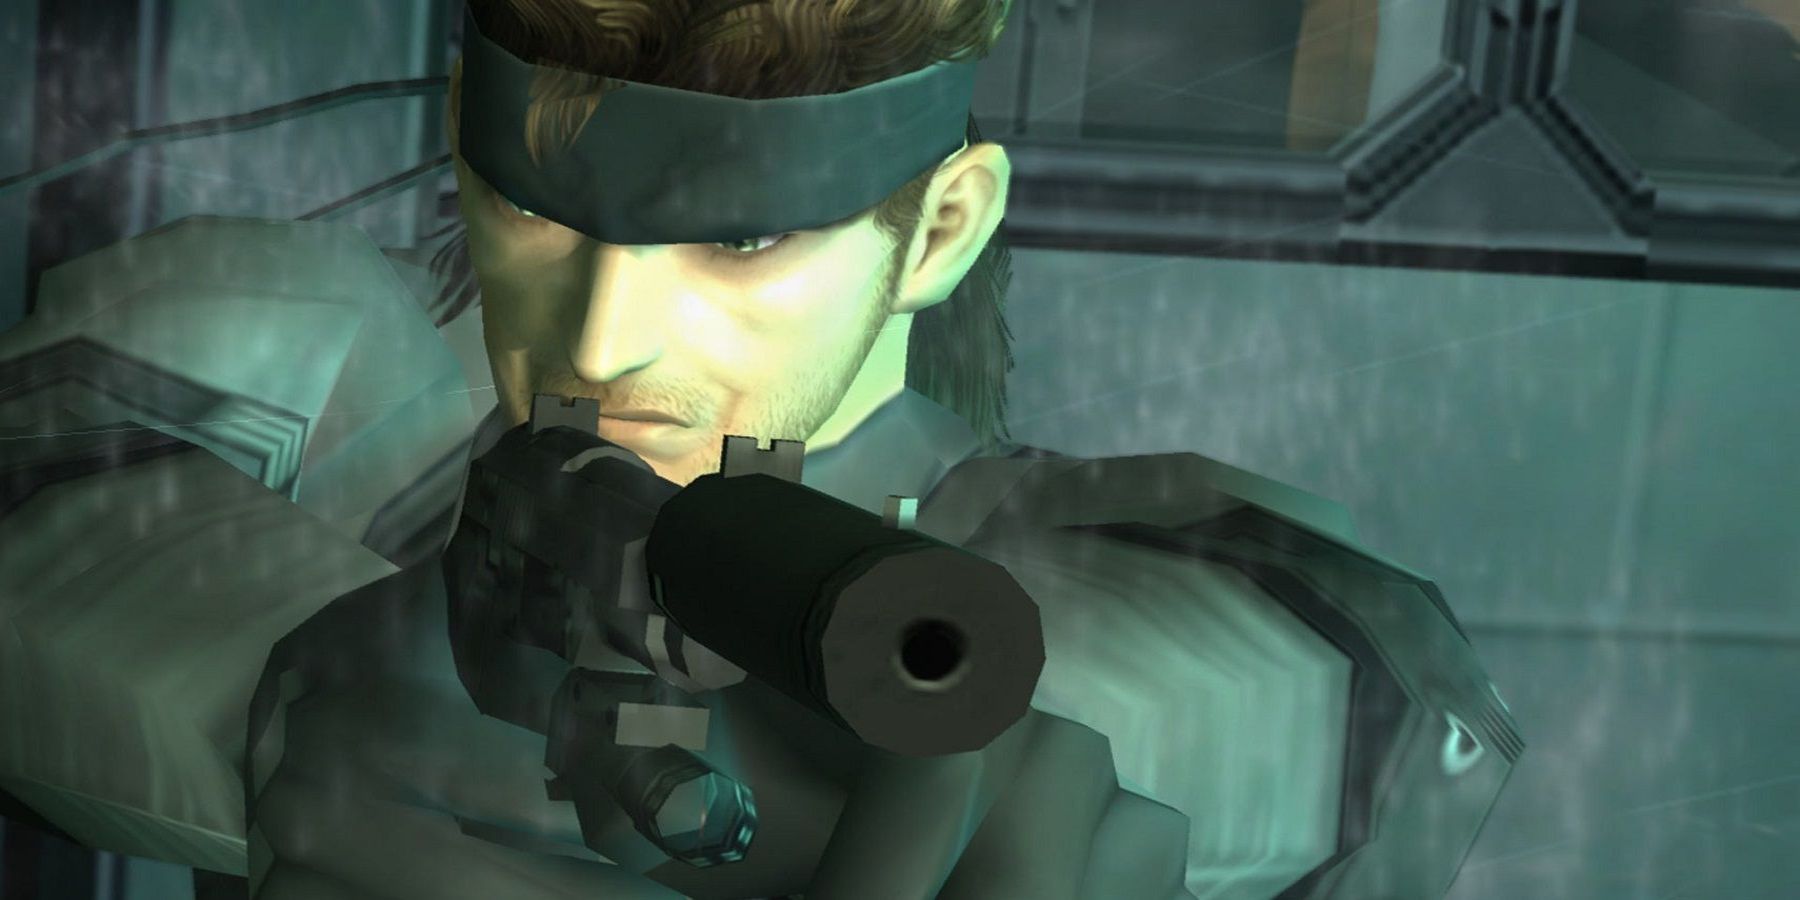 Solid snake pointing a gun in Metal Gear Solid 2.